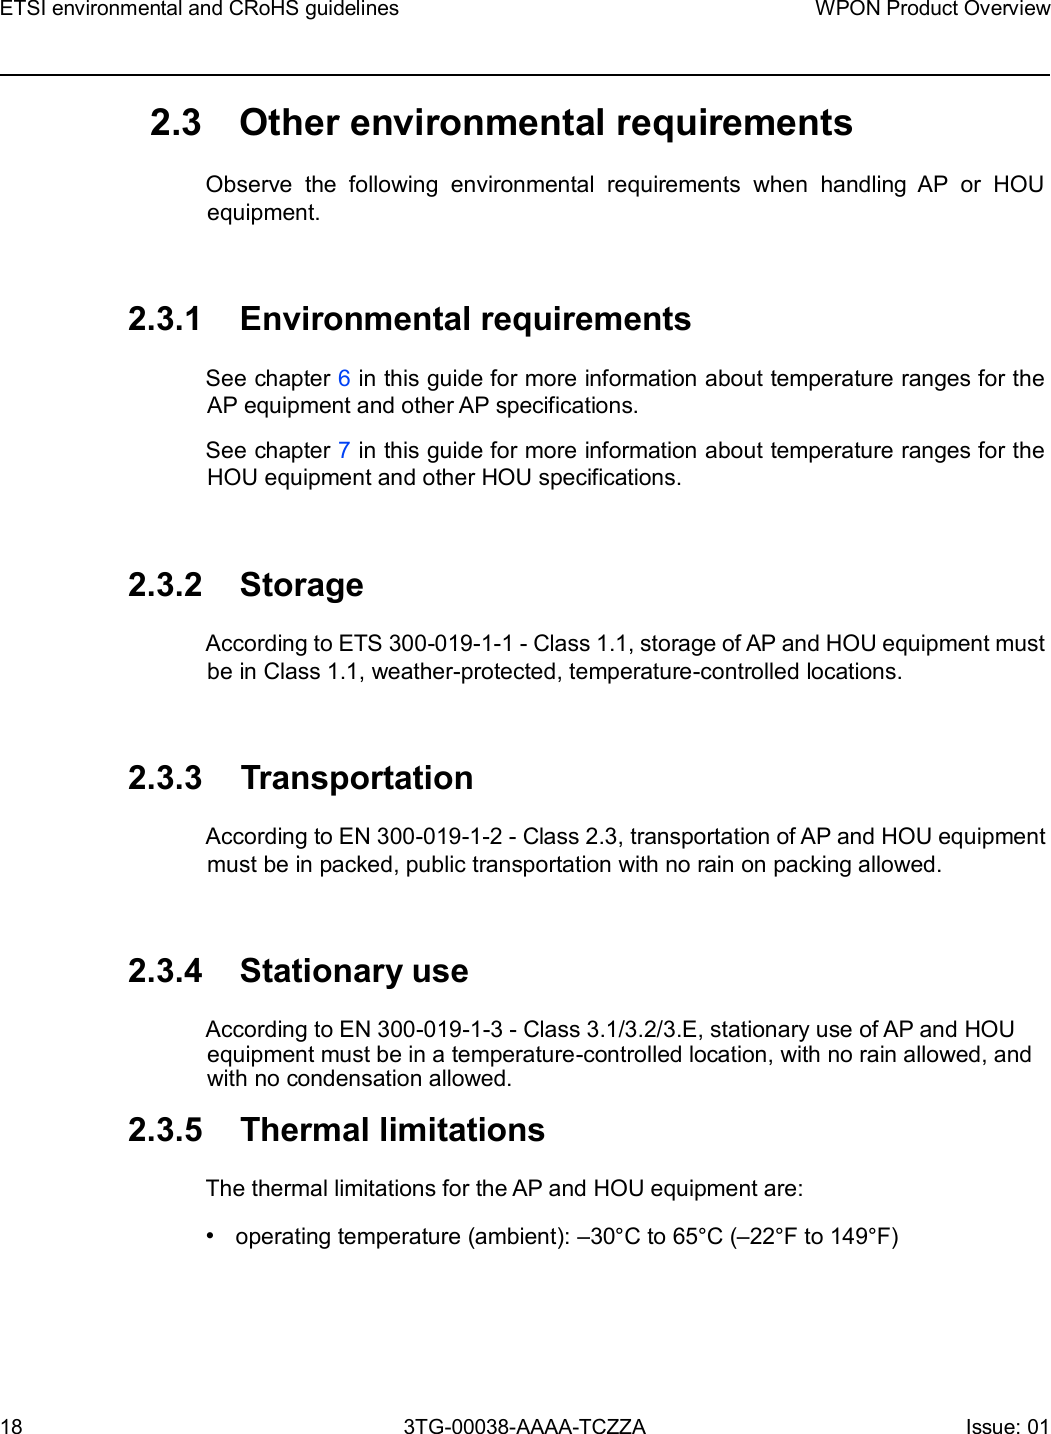 Page 18 of Nokia Bell 7577WPONAPAC WPON User Manual WPON Product Overview